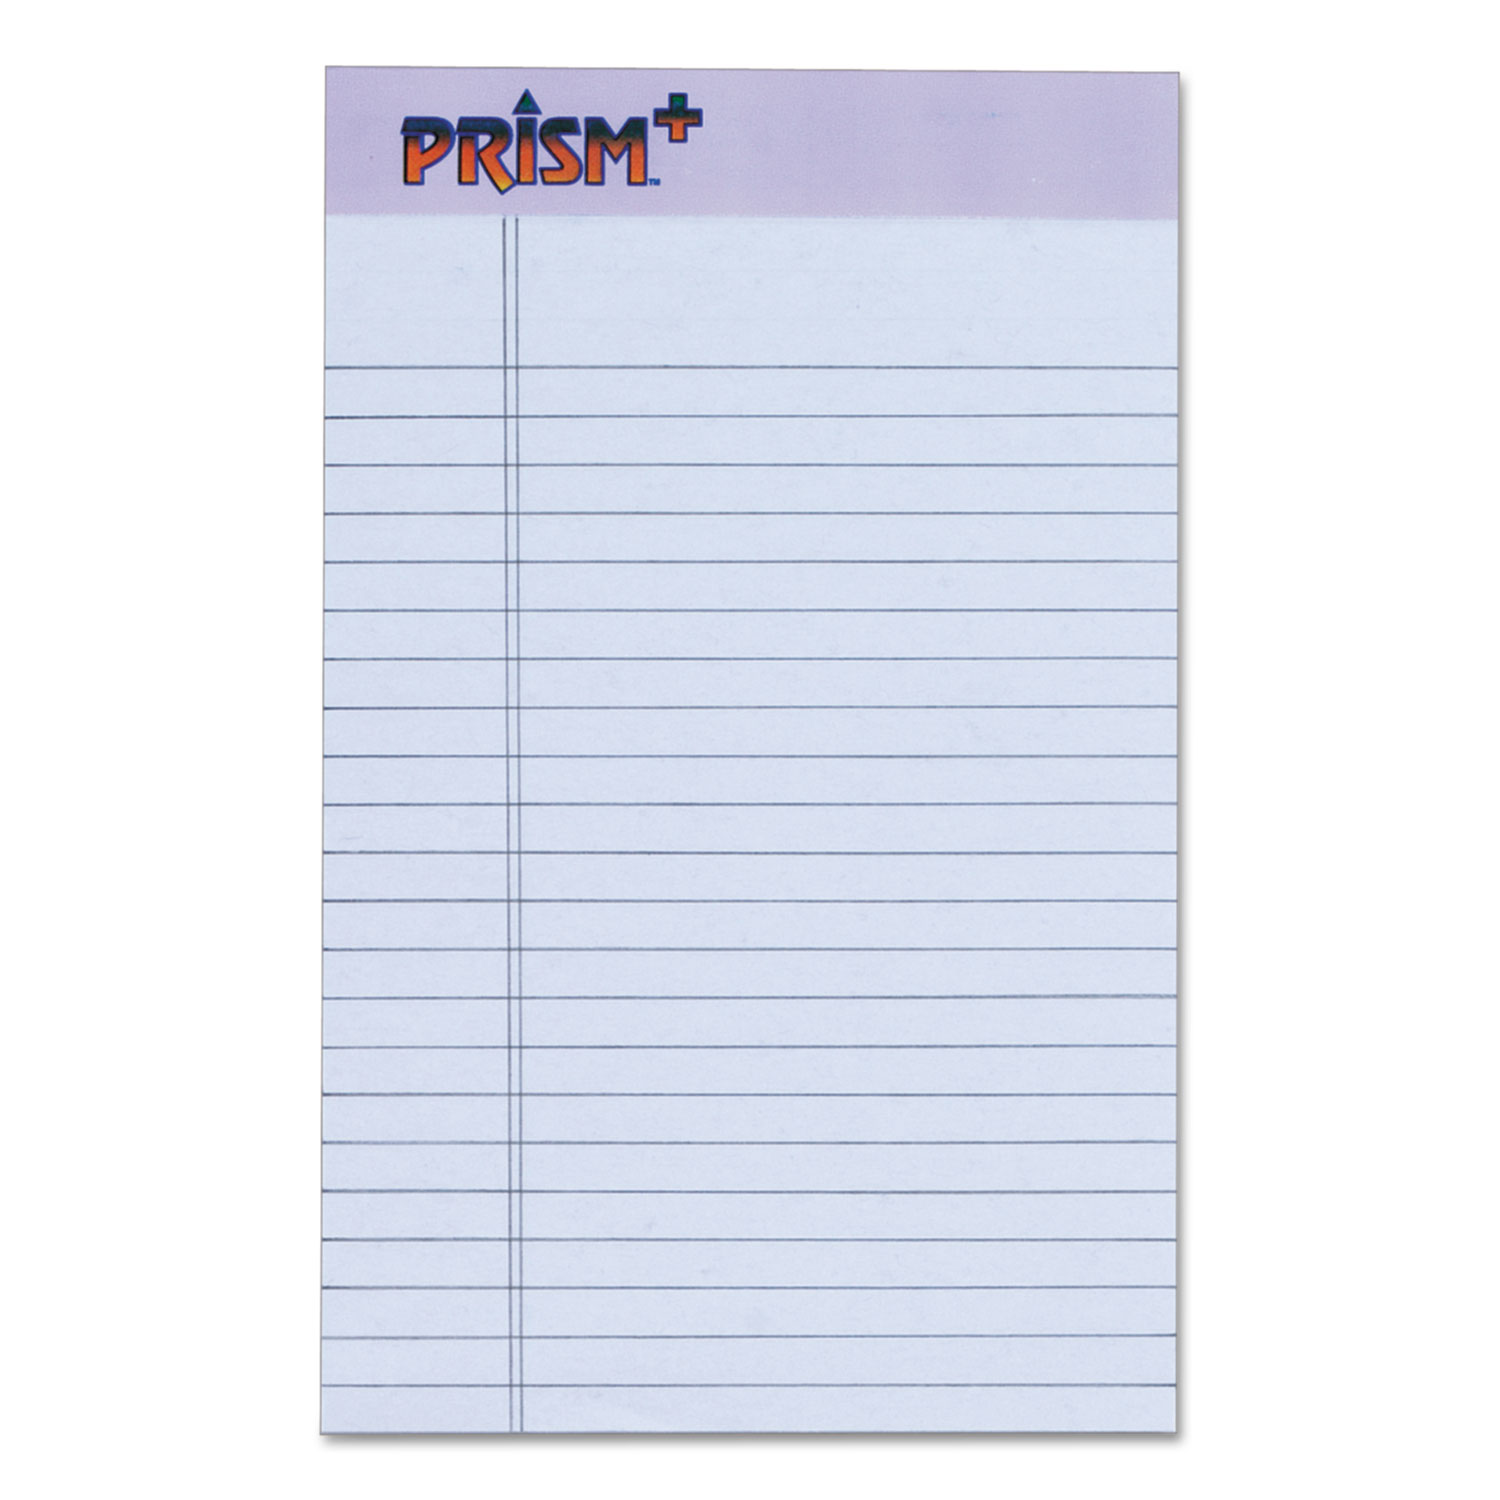  TOPS 63040 Prism + Writing Pads, Narrow Rule, 5 x 8, Pastel Orchid, 50 Sheets, 12/Pack (TOP63040) 